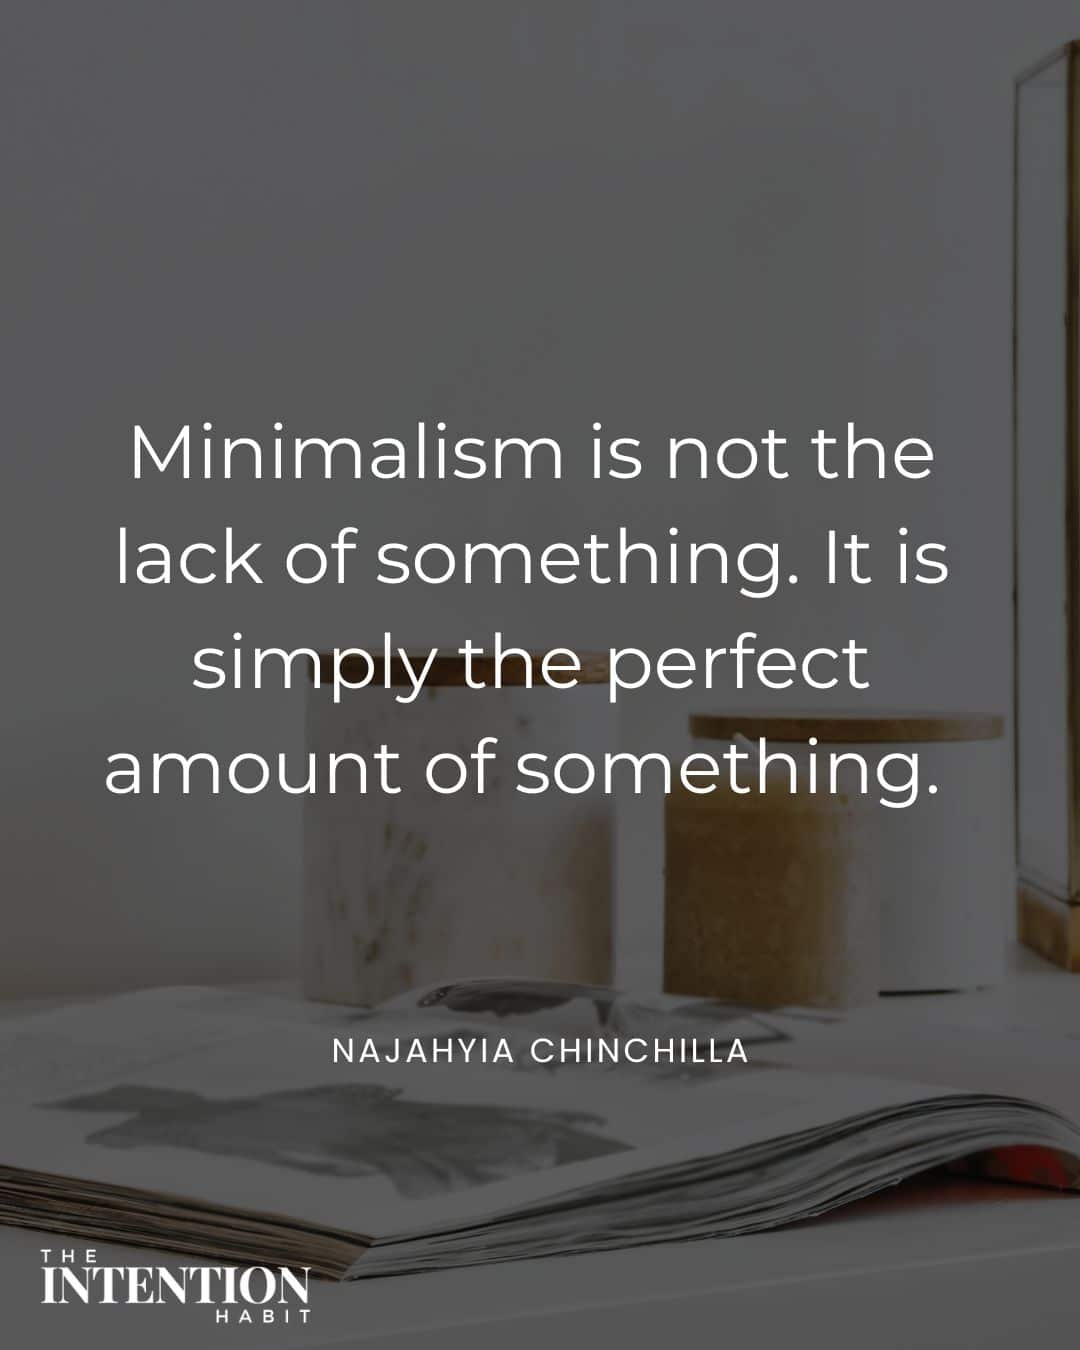 minimalism is not the lack of something, it is simply the perfect amount of something